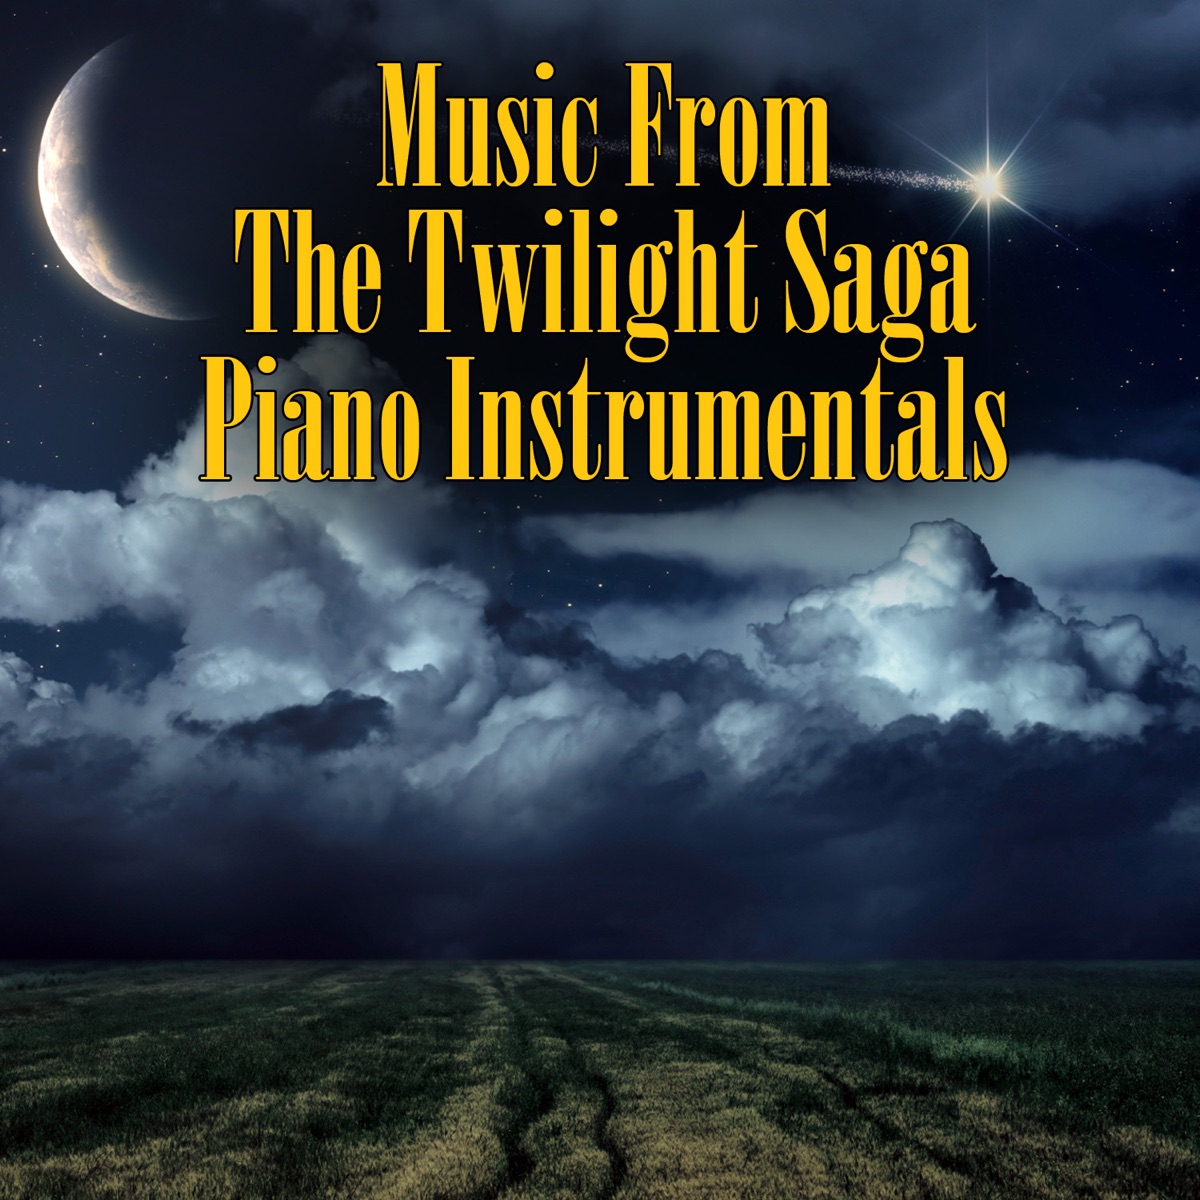 Music From The Twilight Saga - Piano Instrumentals by Vampire Piano Players  on Apple Music